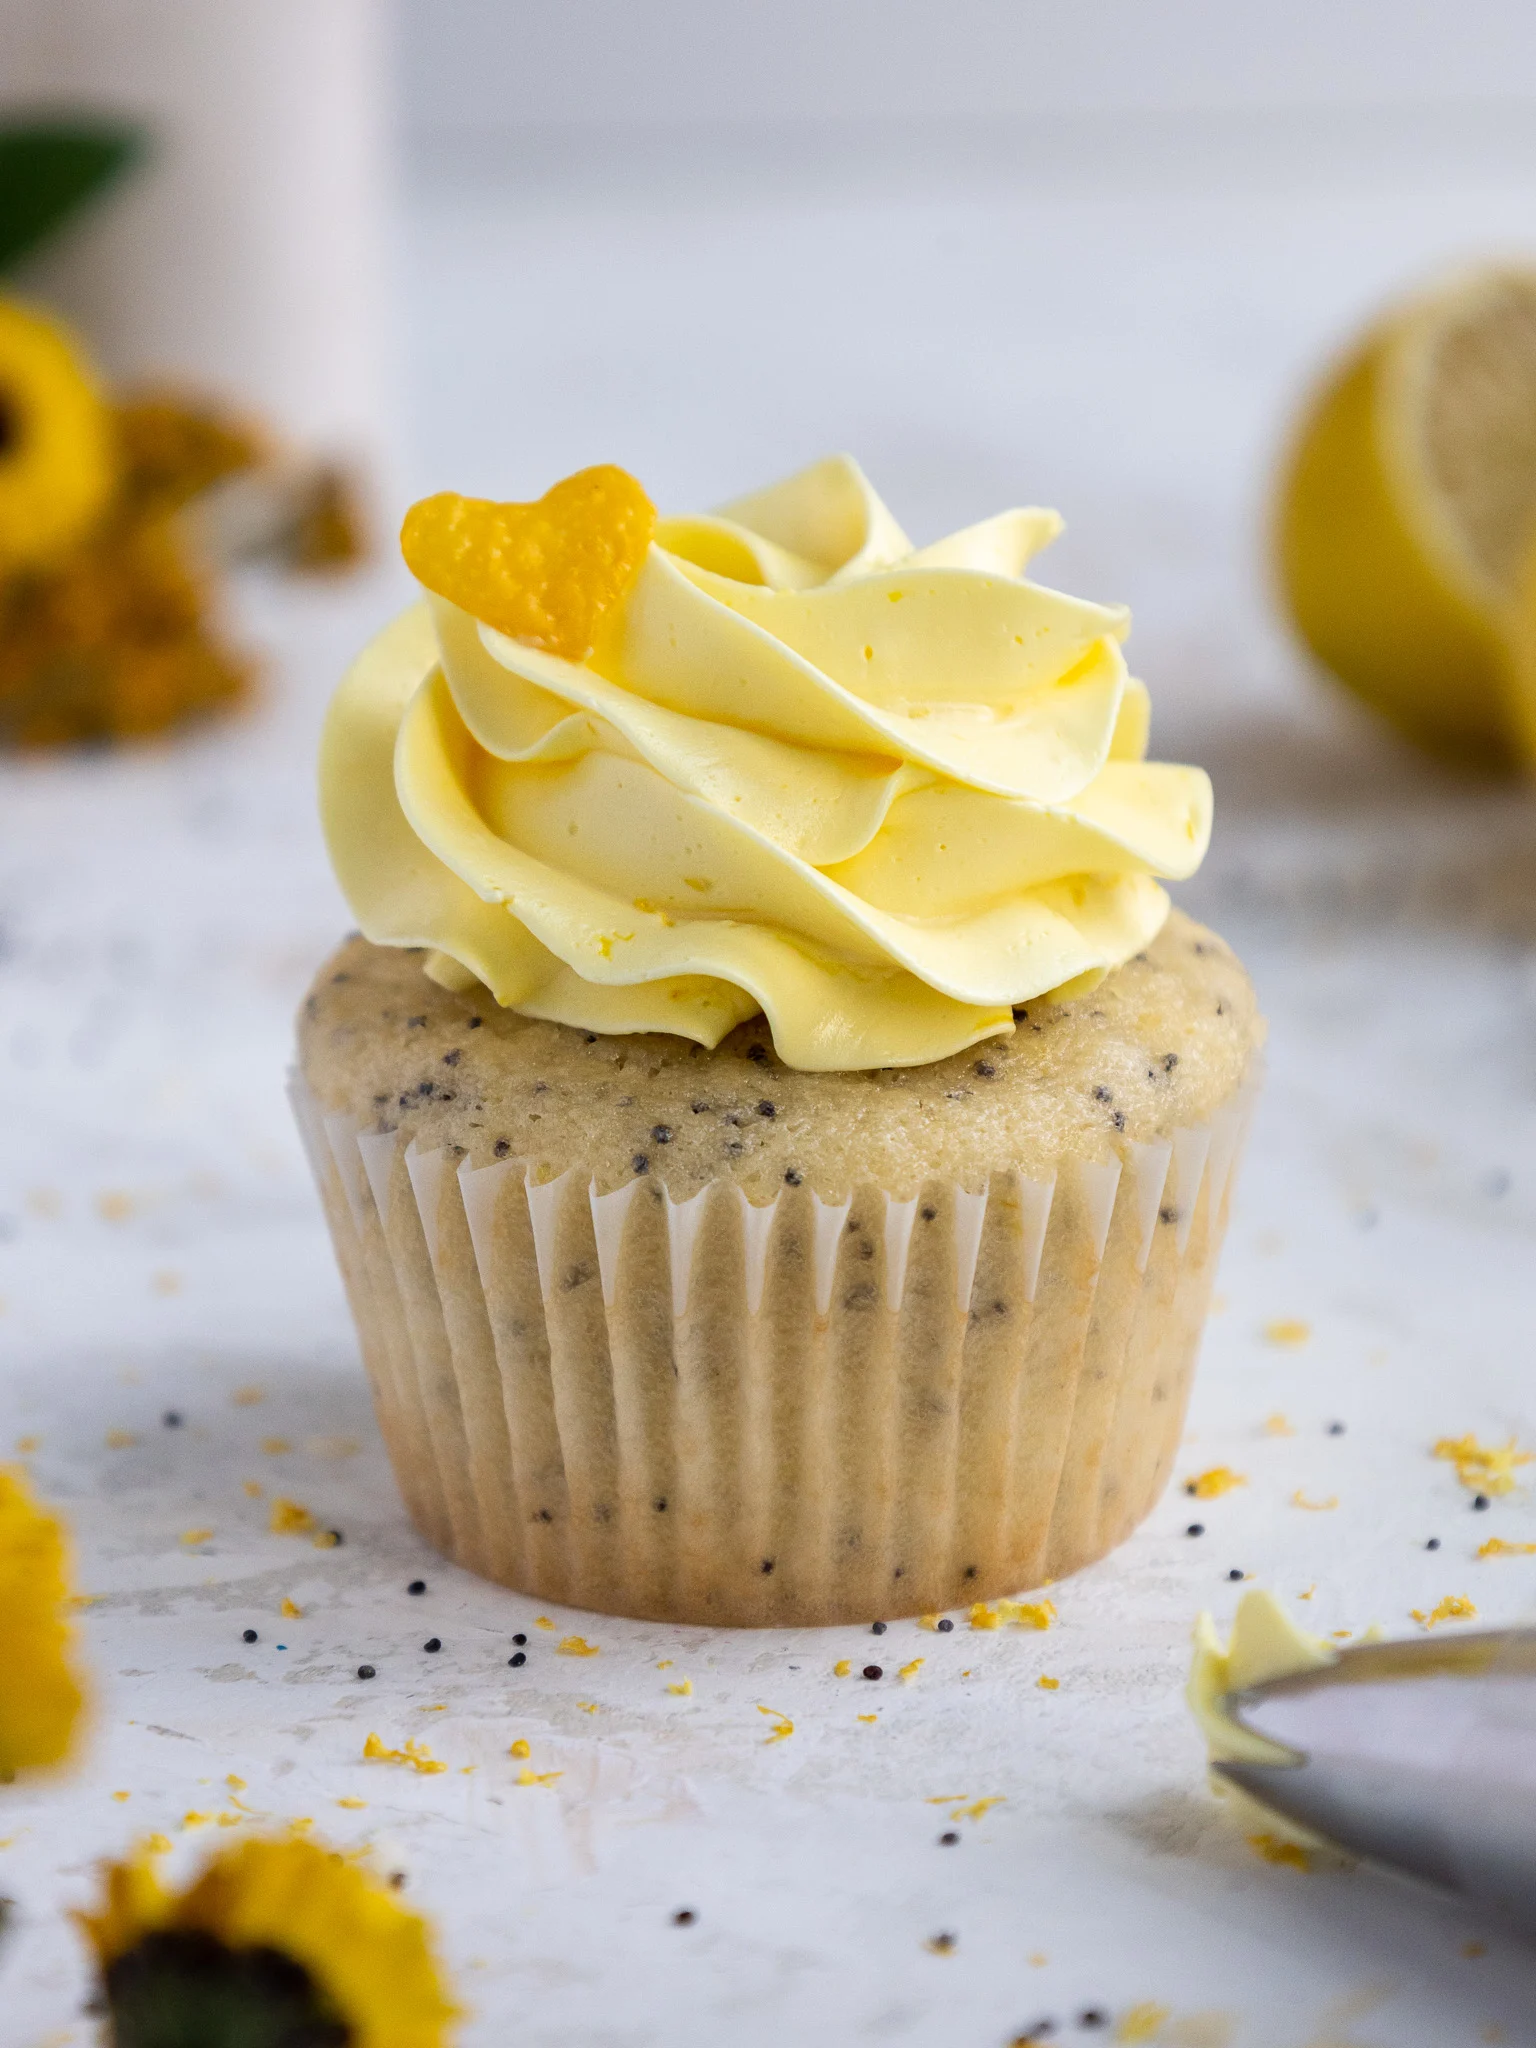 image of a poppy seed cupcake that's been frosted with lemon Swiss meringue buttercream